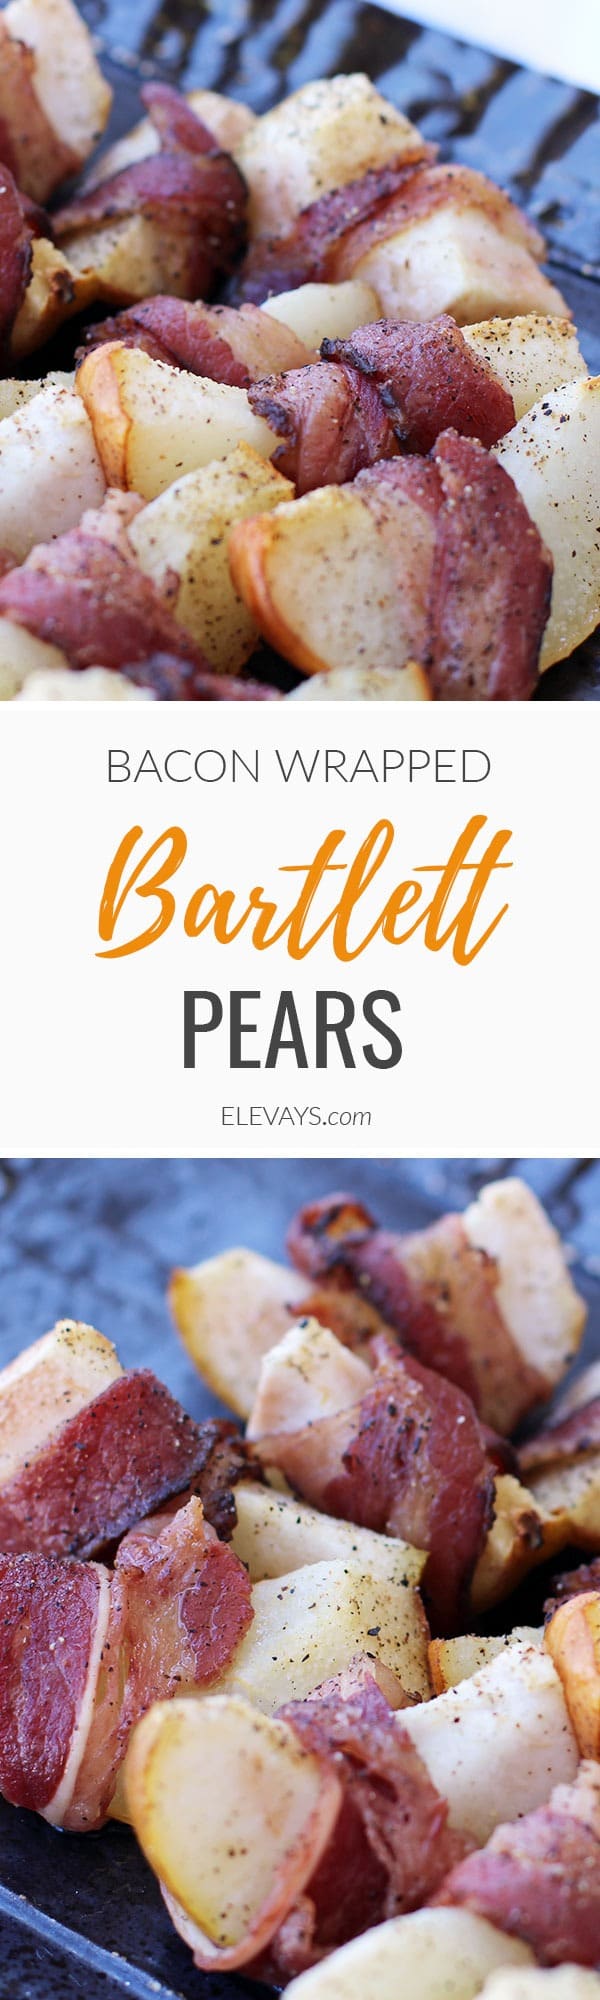 Delicious Beef Bacon Wrapped Bartlett Pears are a perfect fall recipe for a snack or a side. #paleo #eathealthy #bacon